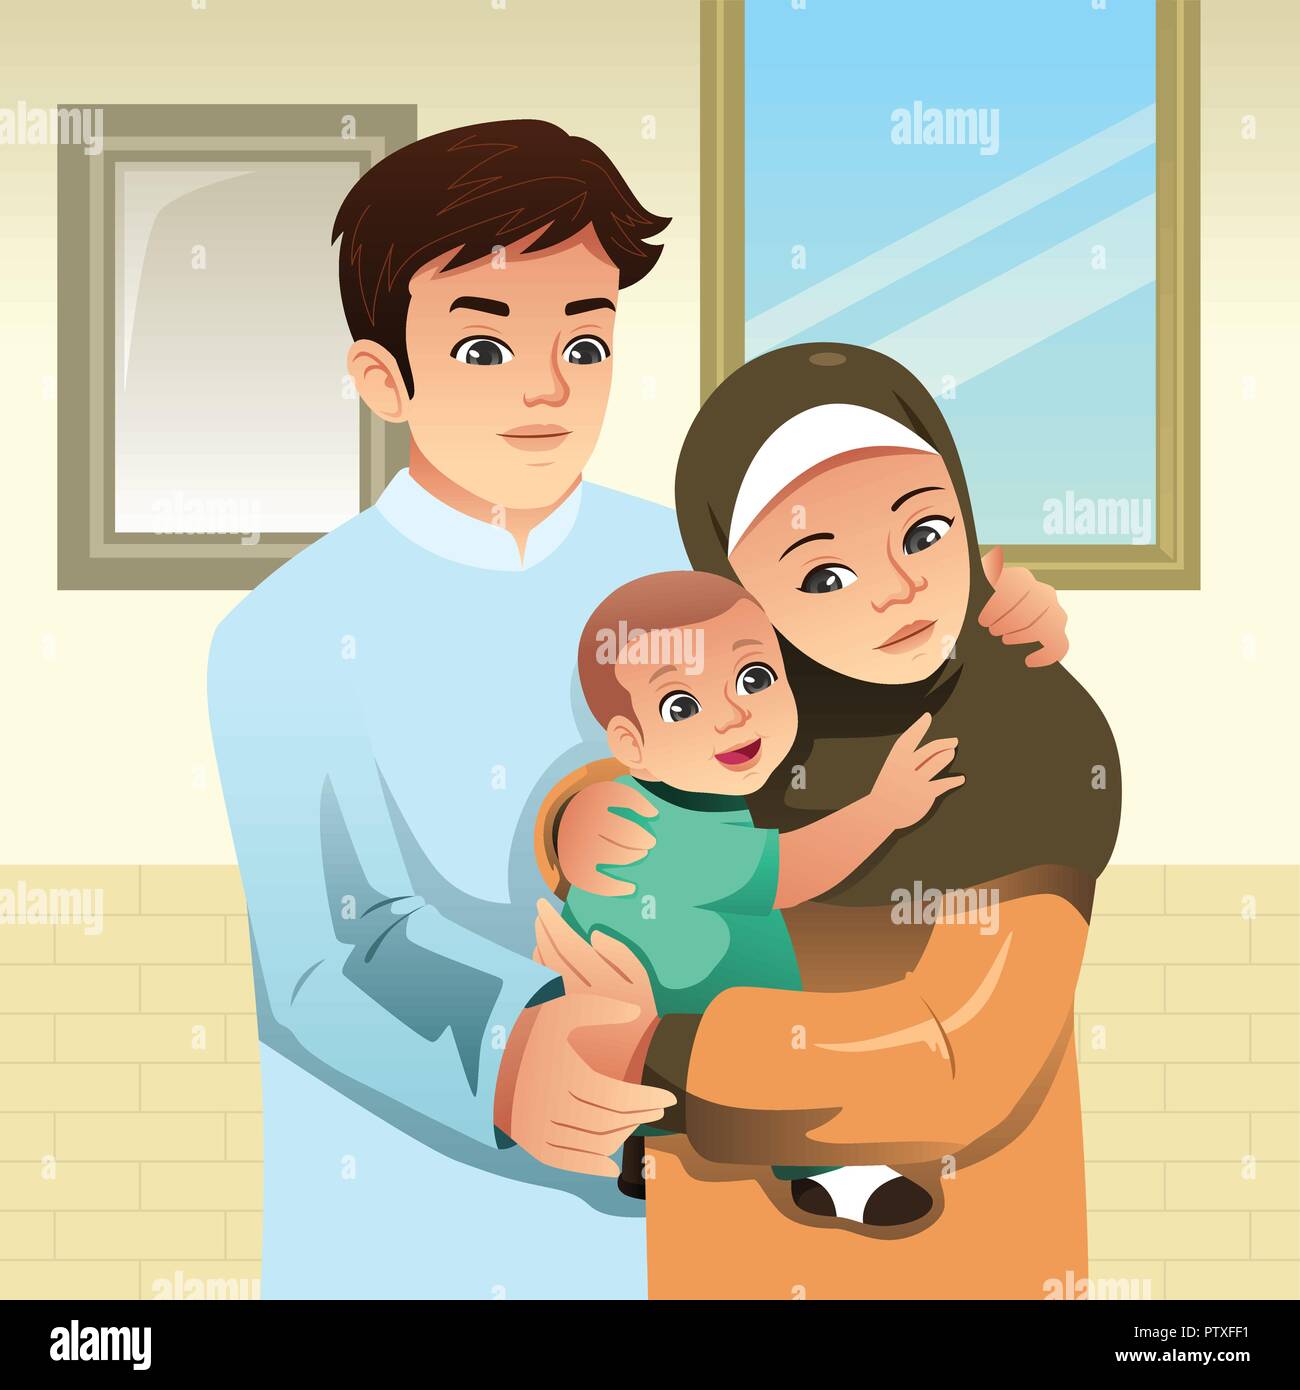 A Vector Illustration Of Muslim Family At Home Stock Image